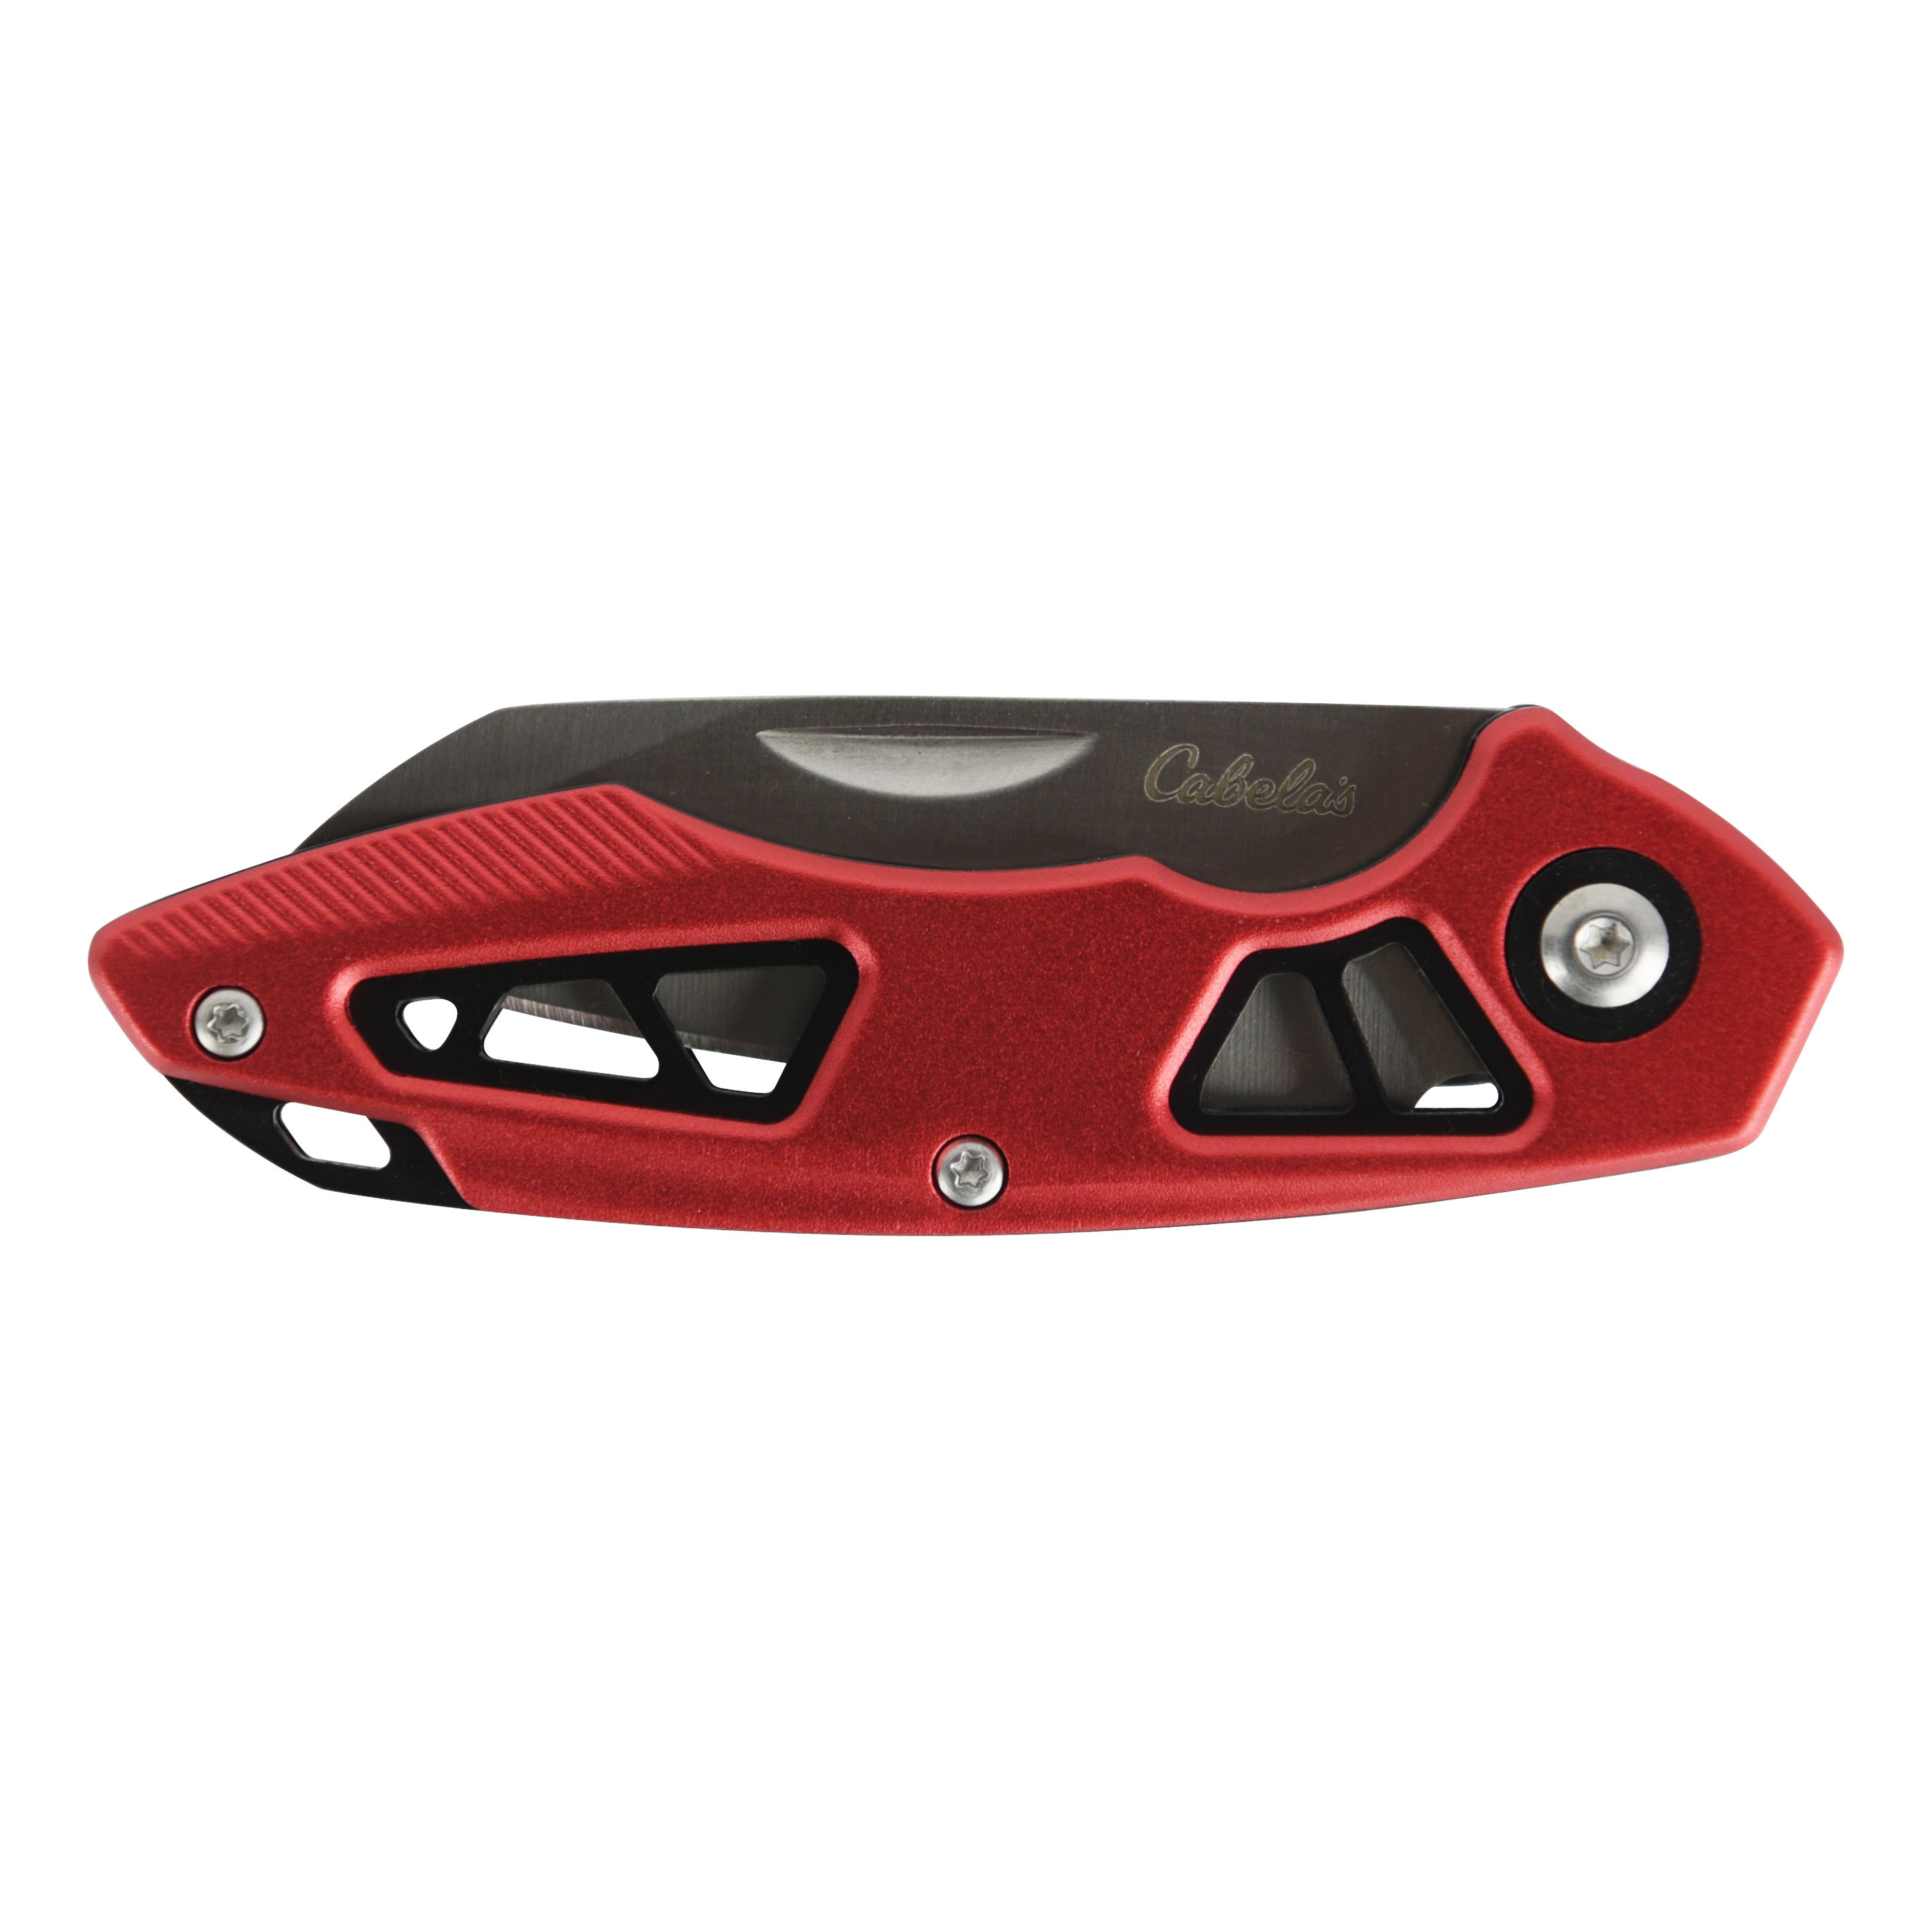 Cabela's Knife and Flashlight Combo with Waterproof Case - Red - Knife - Closed View